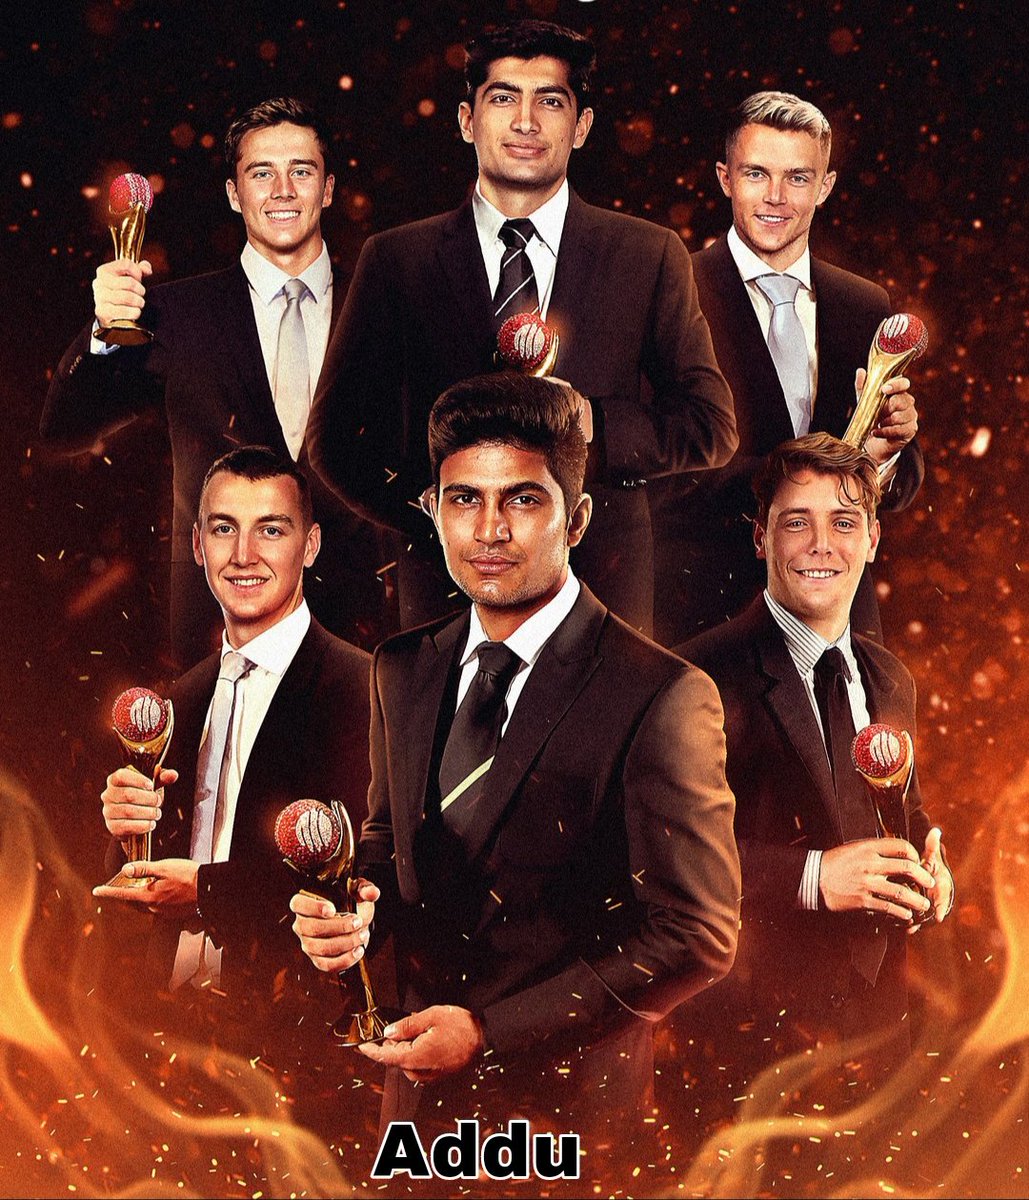 Which young star is a future ICC cricketer of the year #IPL2023Auction #ICCRankings #icccriketeroftheyear #future #ShubmanGill #harrybrook #naseem #CameronGreen #samcurran #babyab